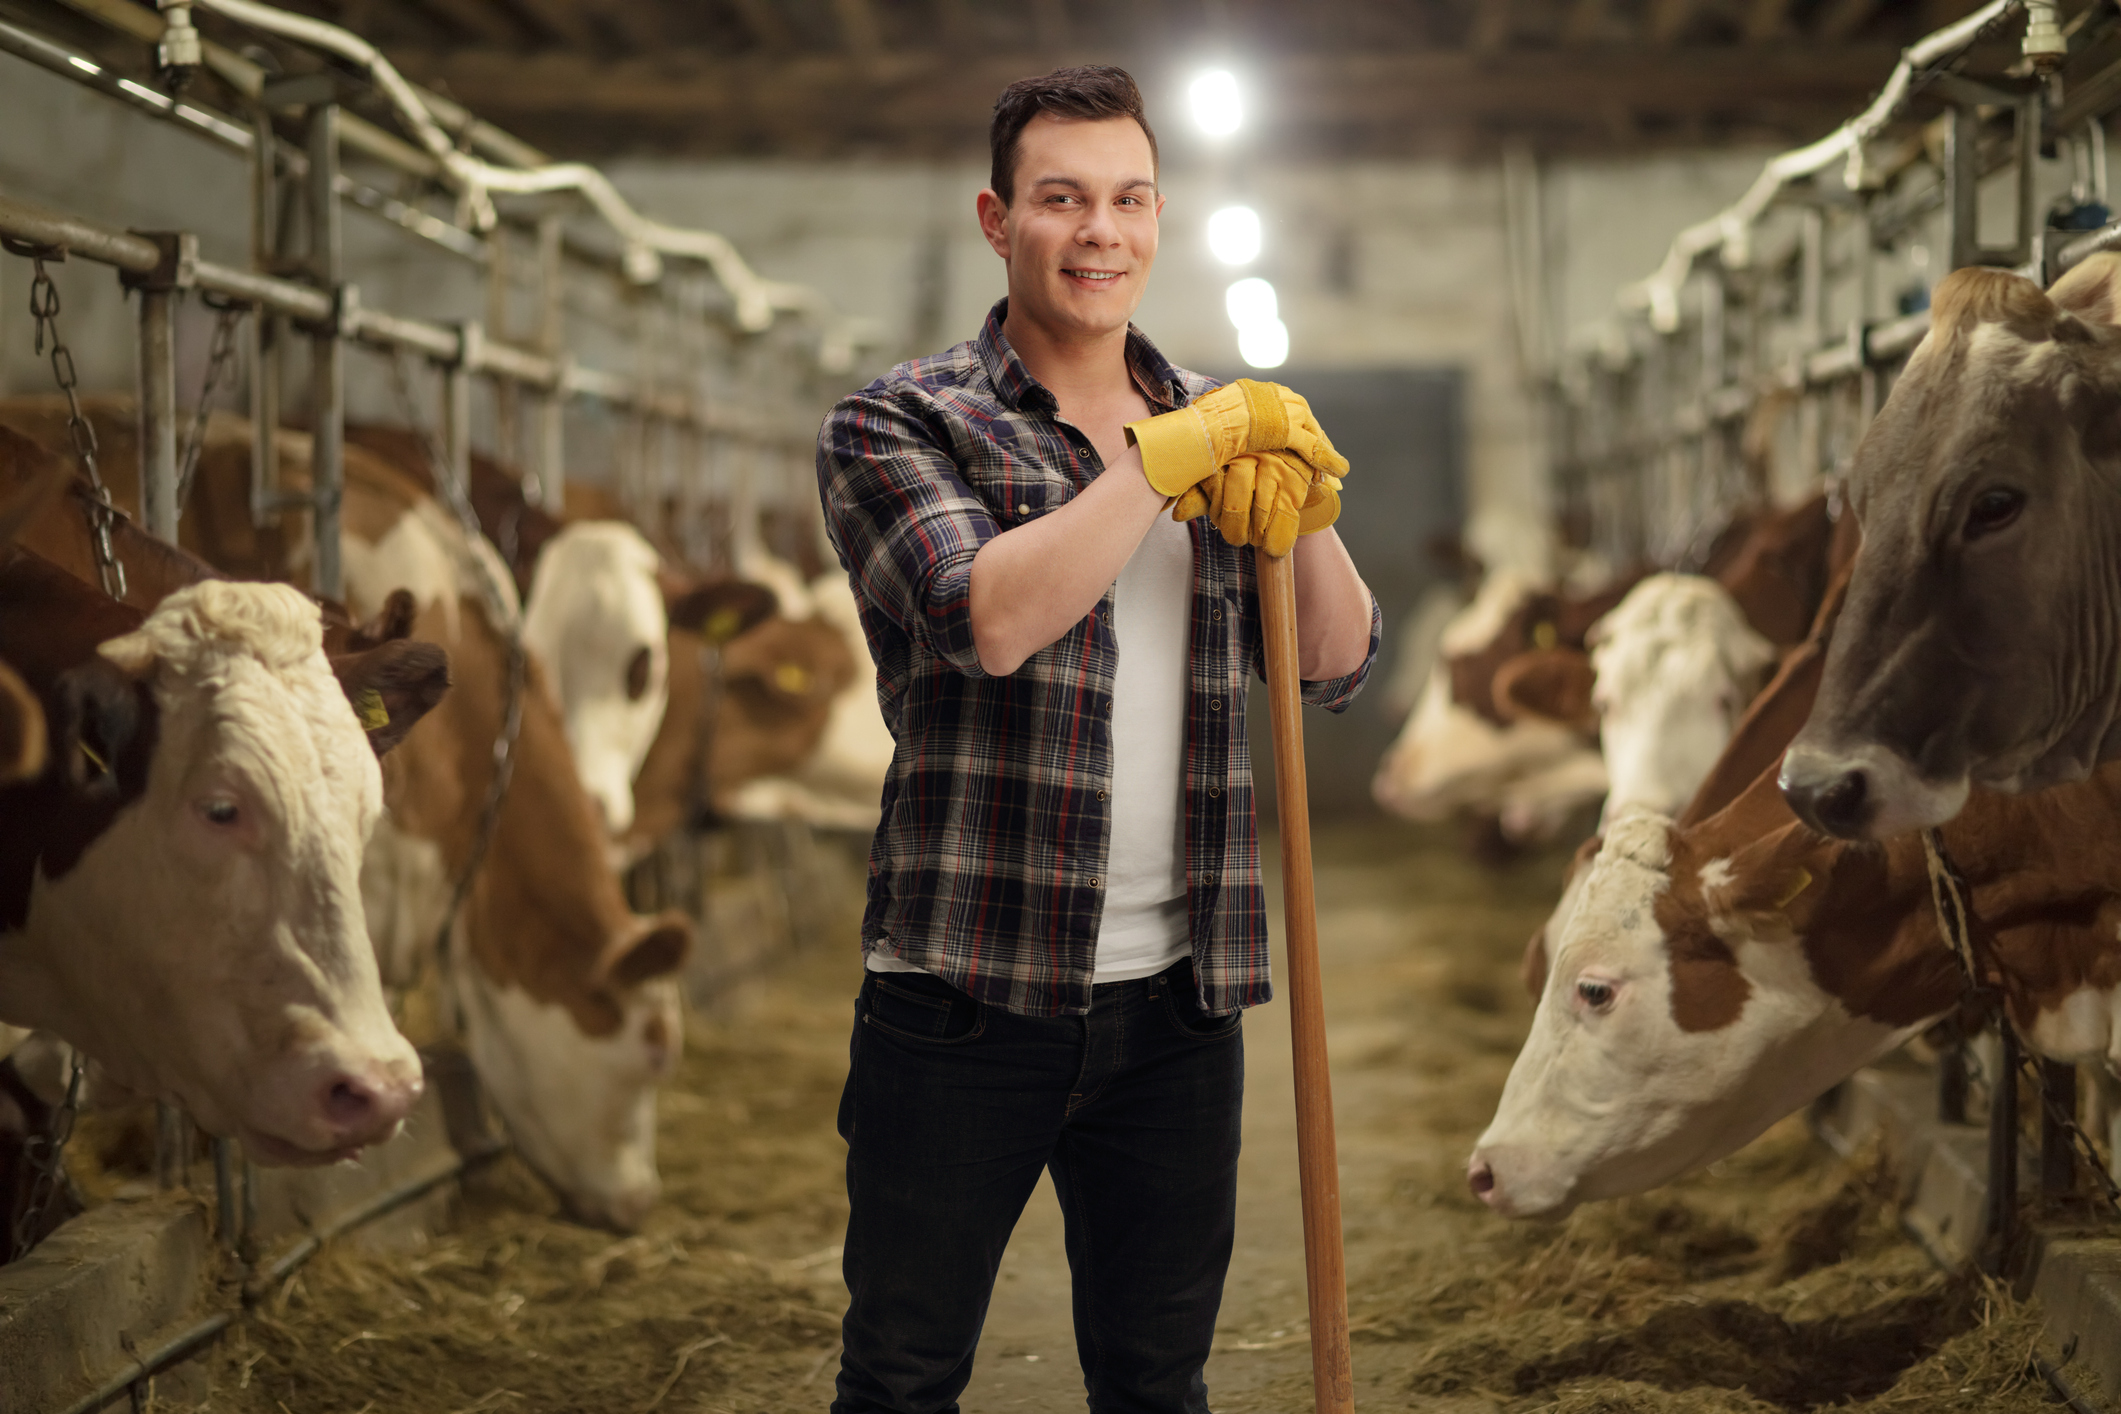 What are The Job Prospects for Agricultural Careers?